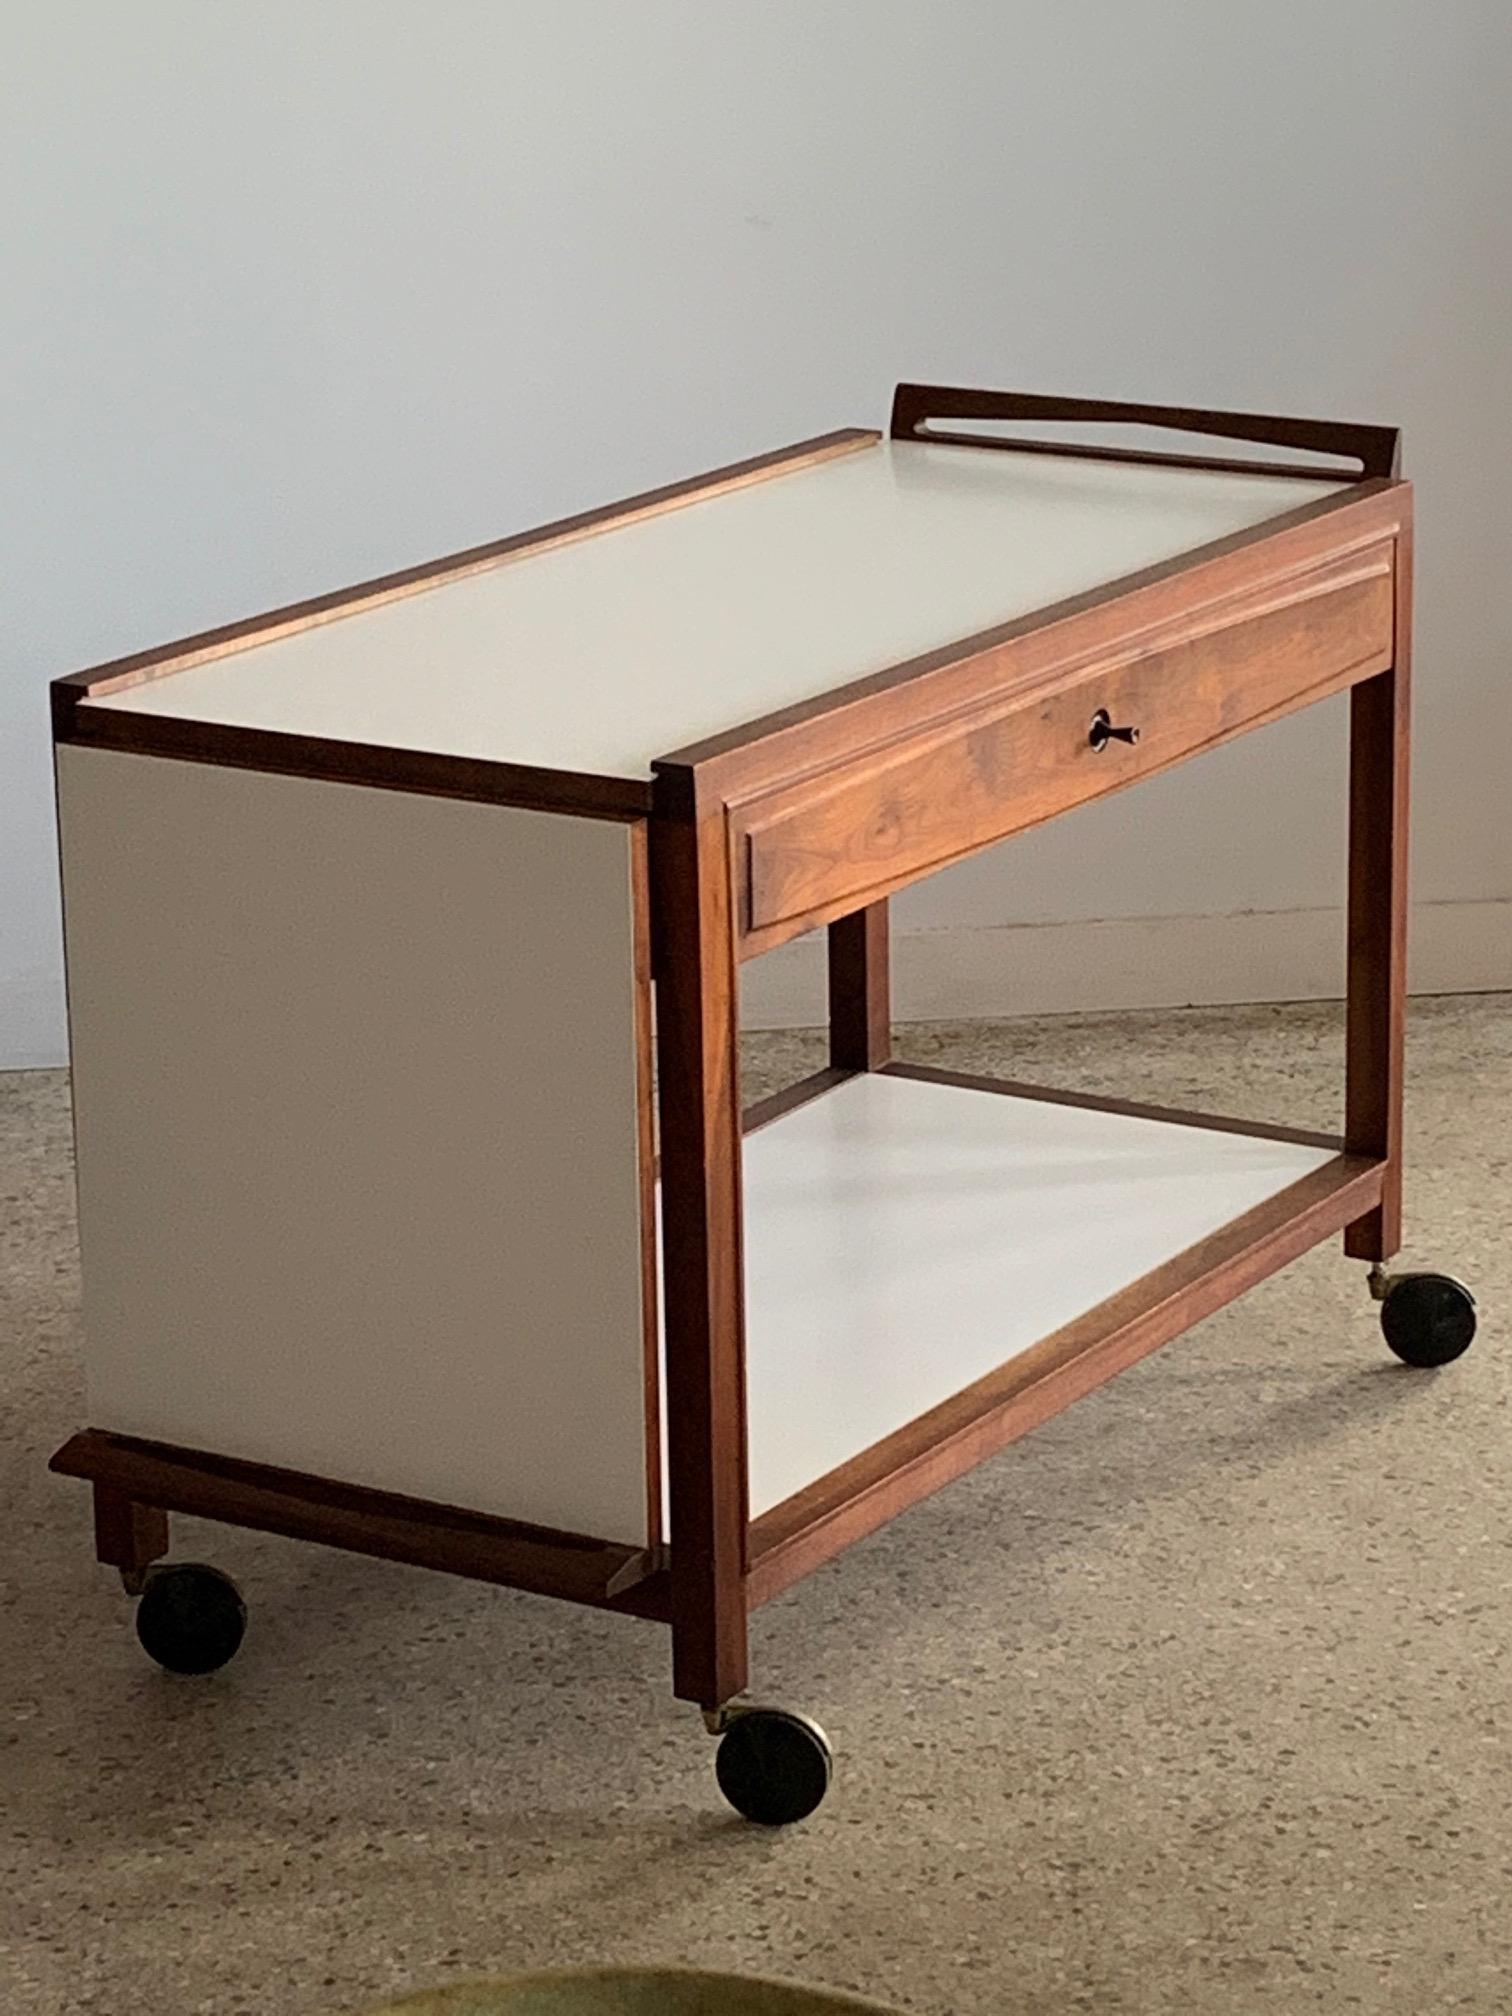 A great Mid-Century Modern Glenn of California Drop Leaf / Expandable Hostess Bar Cart designed by John Kapel extended - 63 long x 20 1/2 deep. Lower shelf, pullout / pull-out drawer, walnut and white formica.

              